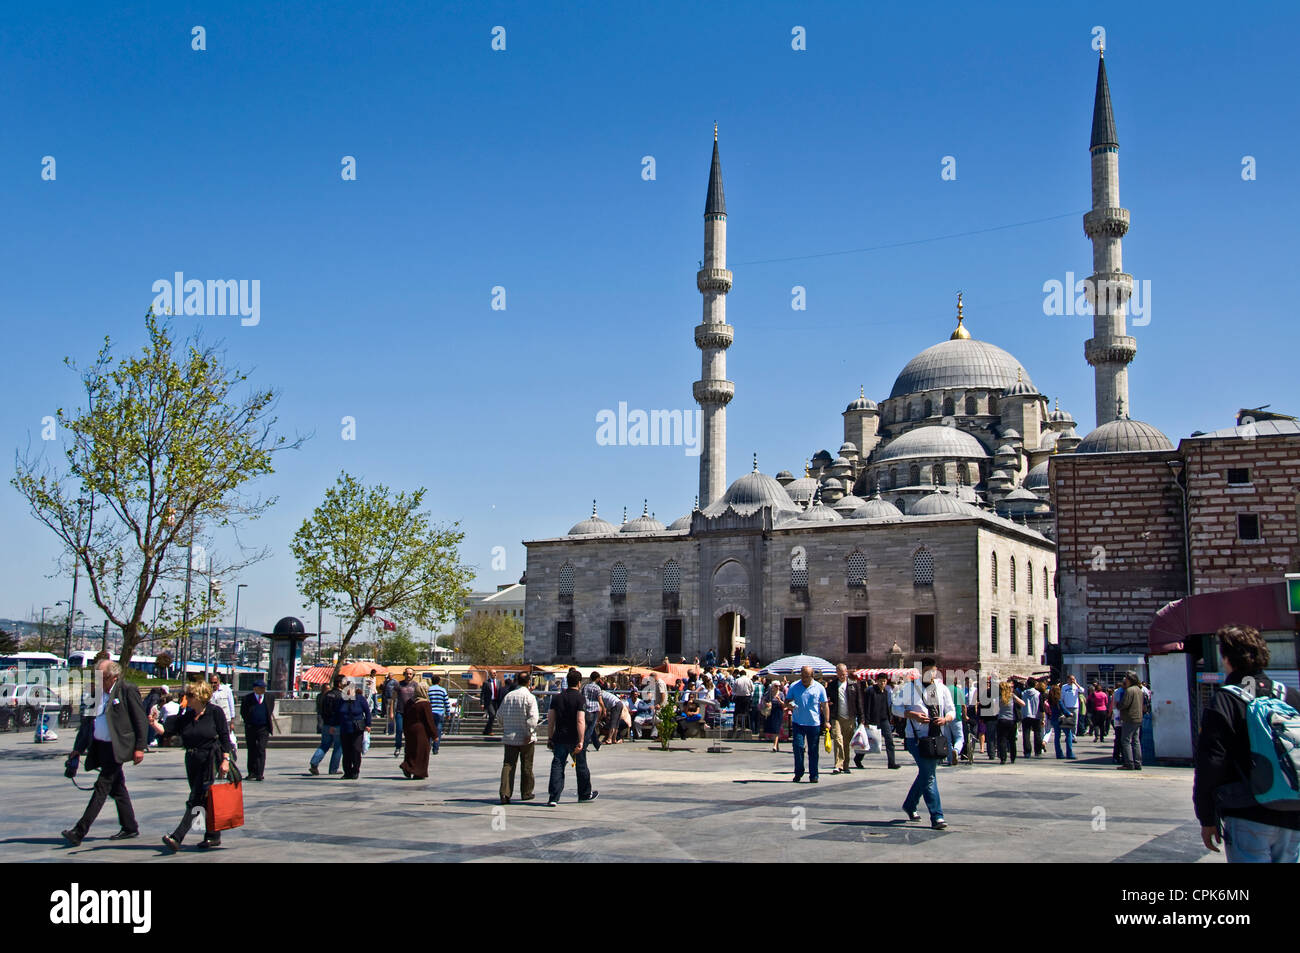 People in the street market close to the New Mosque - Istanbul, Turkey Stock Photo